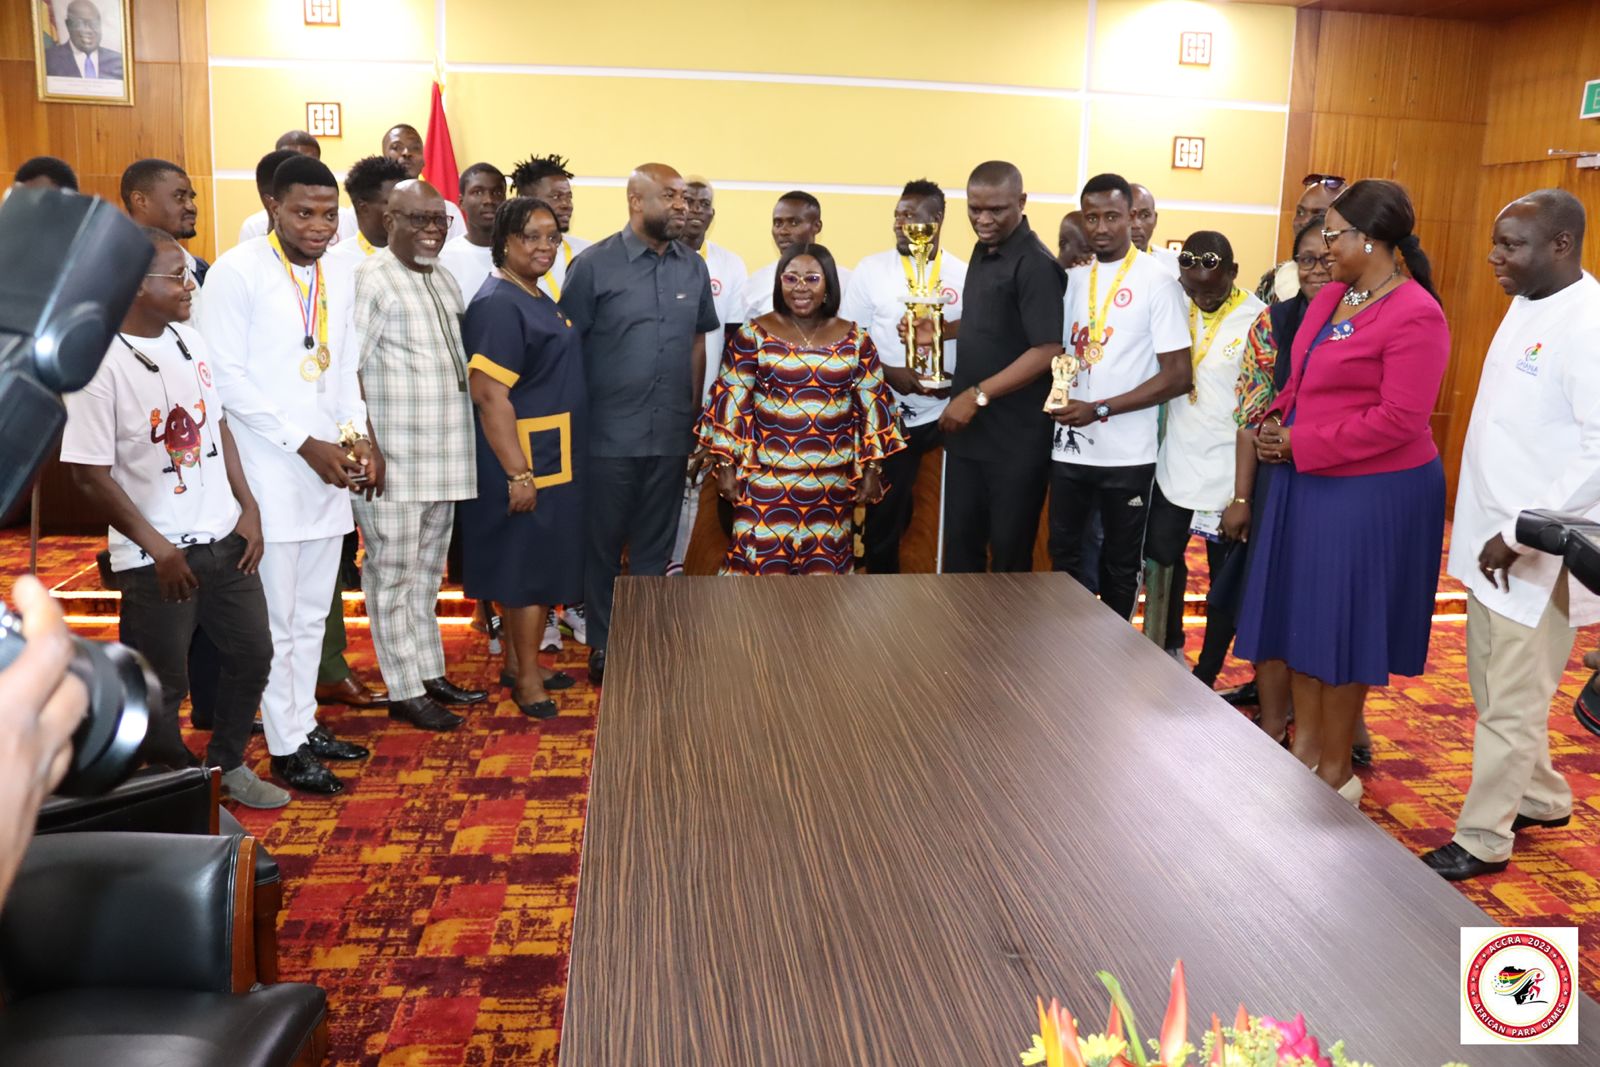 Ghana’s Presidency rallies support for paralympic sports in Ghana and Africa